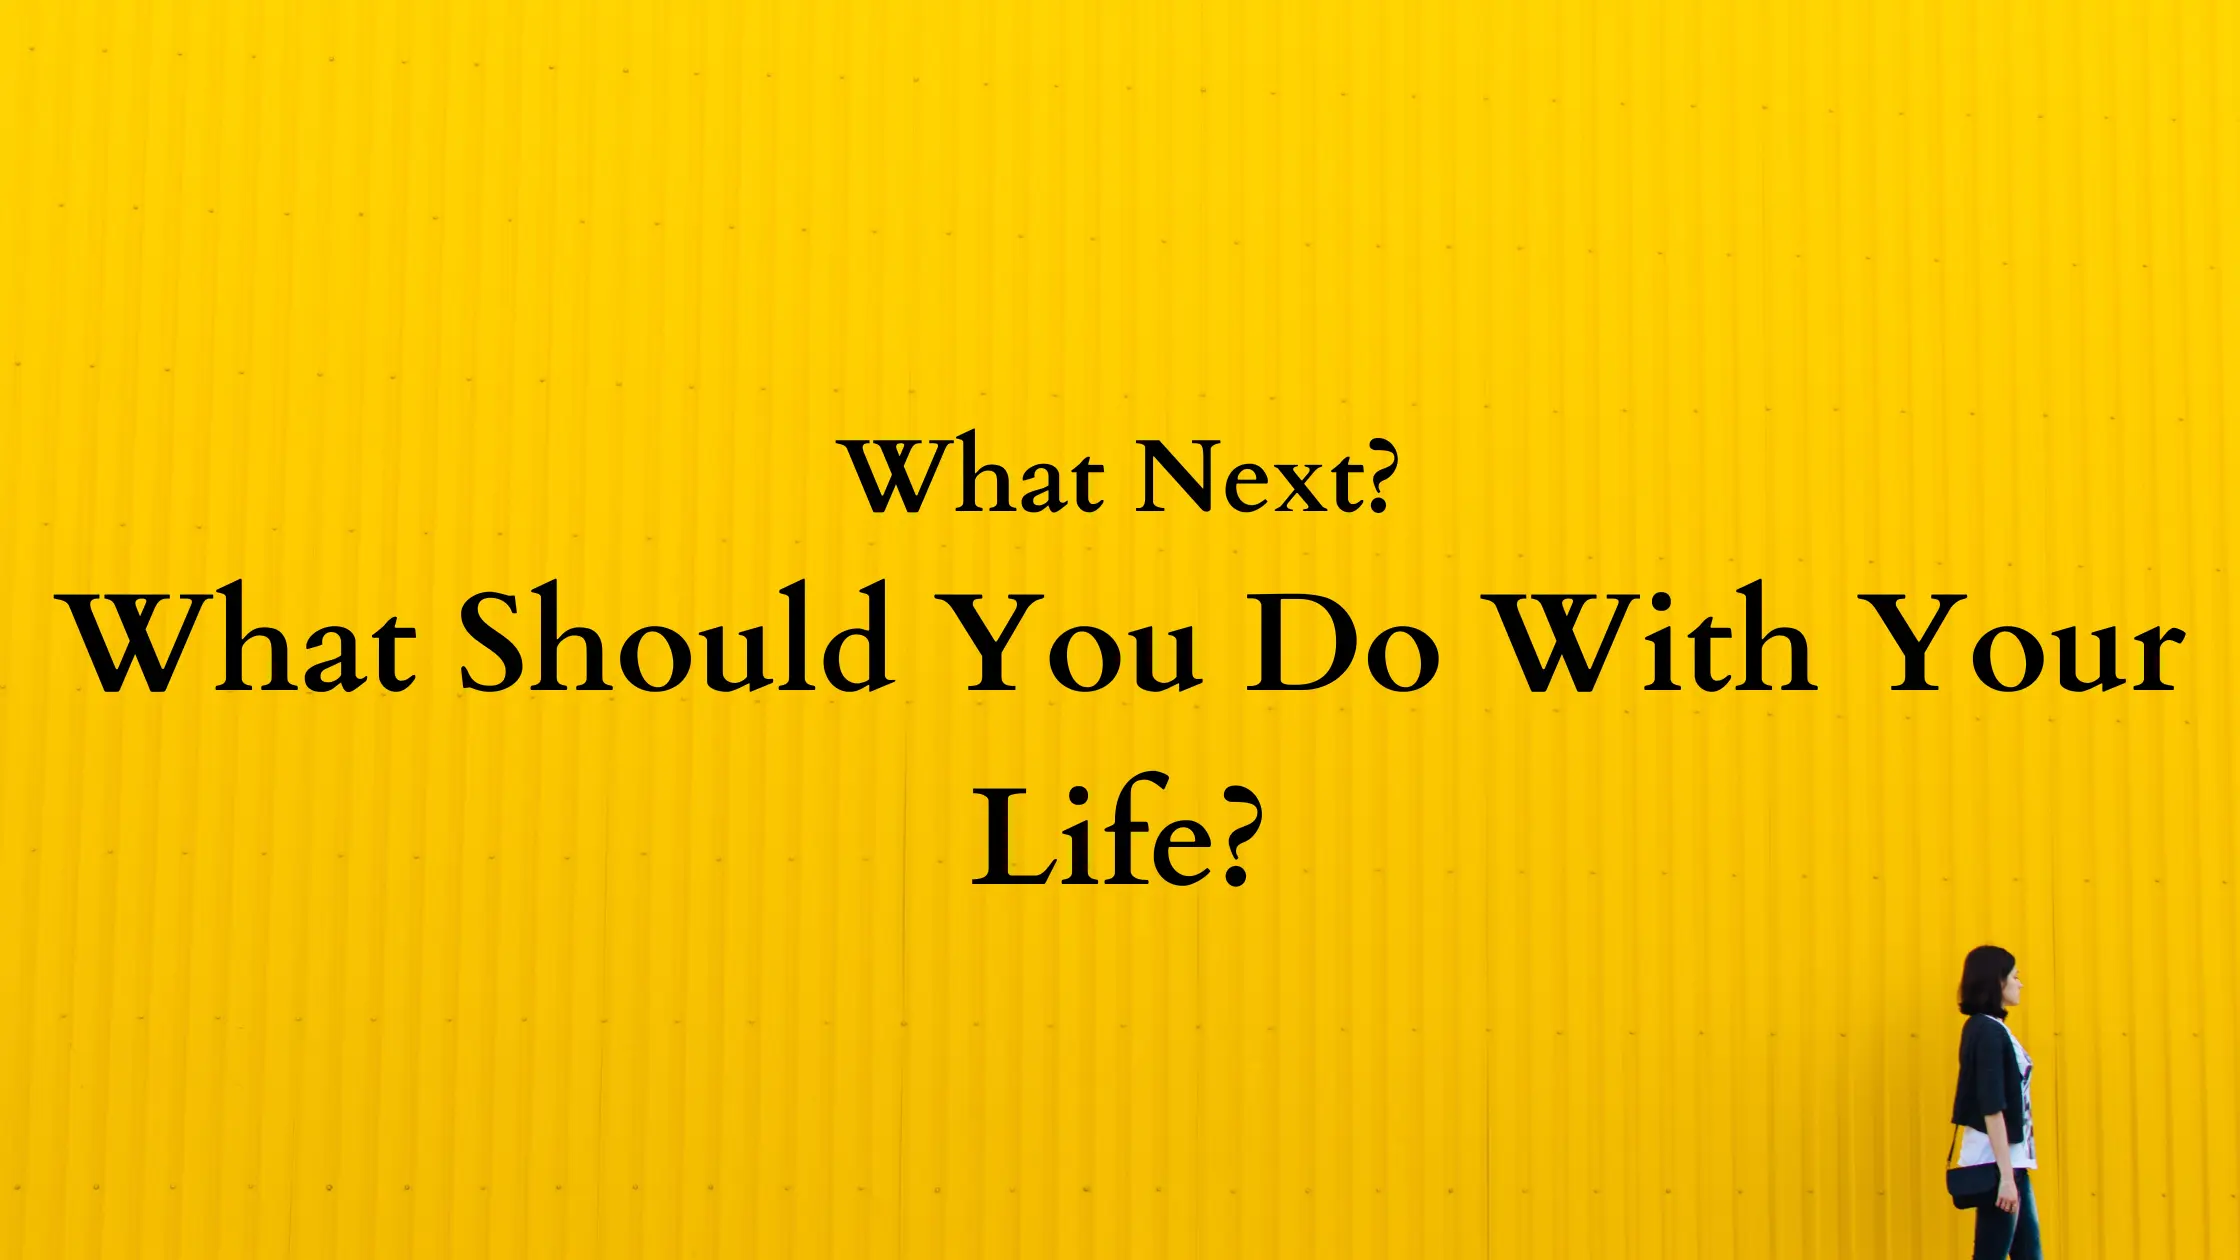 What Should You Do With Your Life?